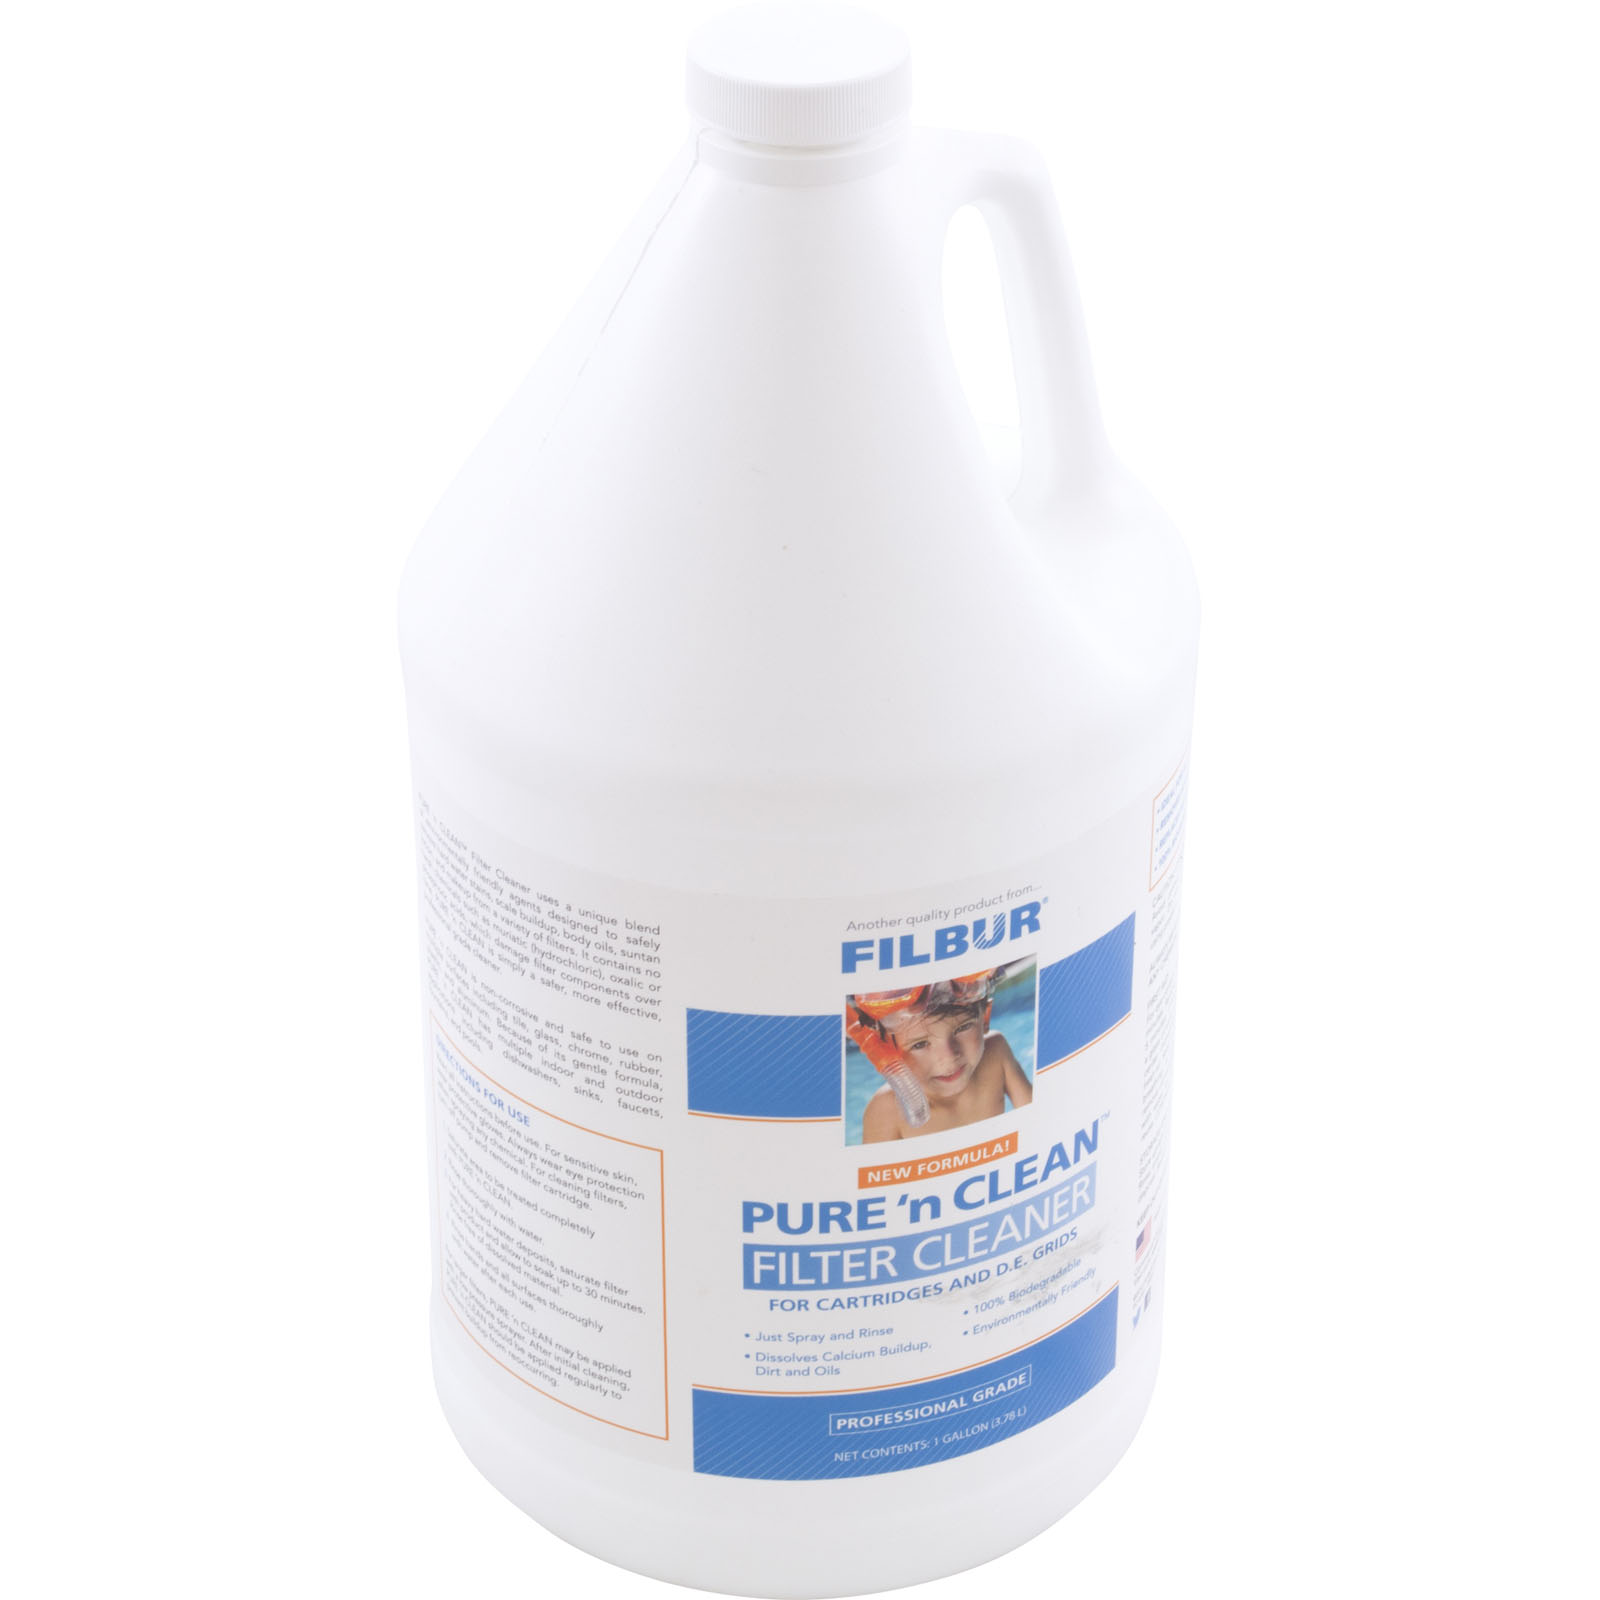 Picture of Cartridge & Grid Cleaner,Filbur,Pure & Clean,1 Gal,Qty 4